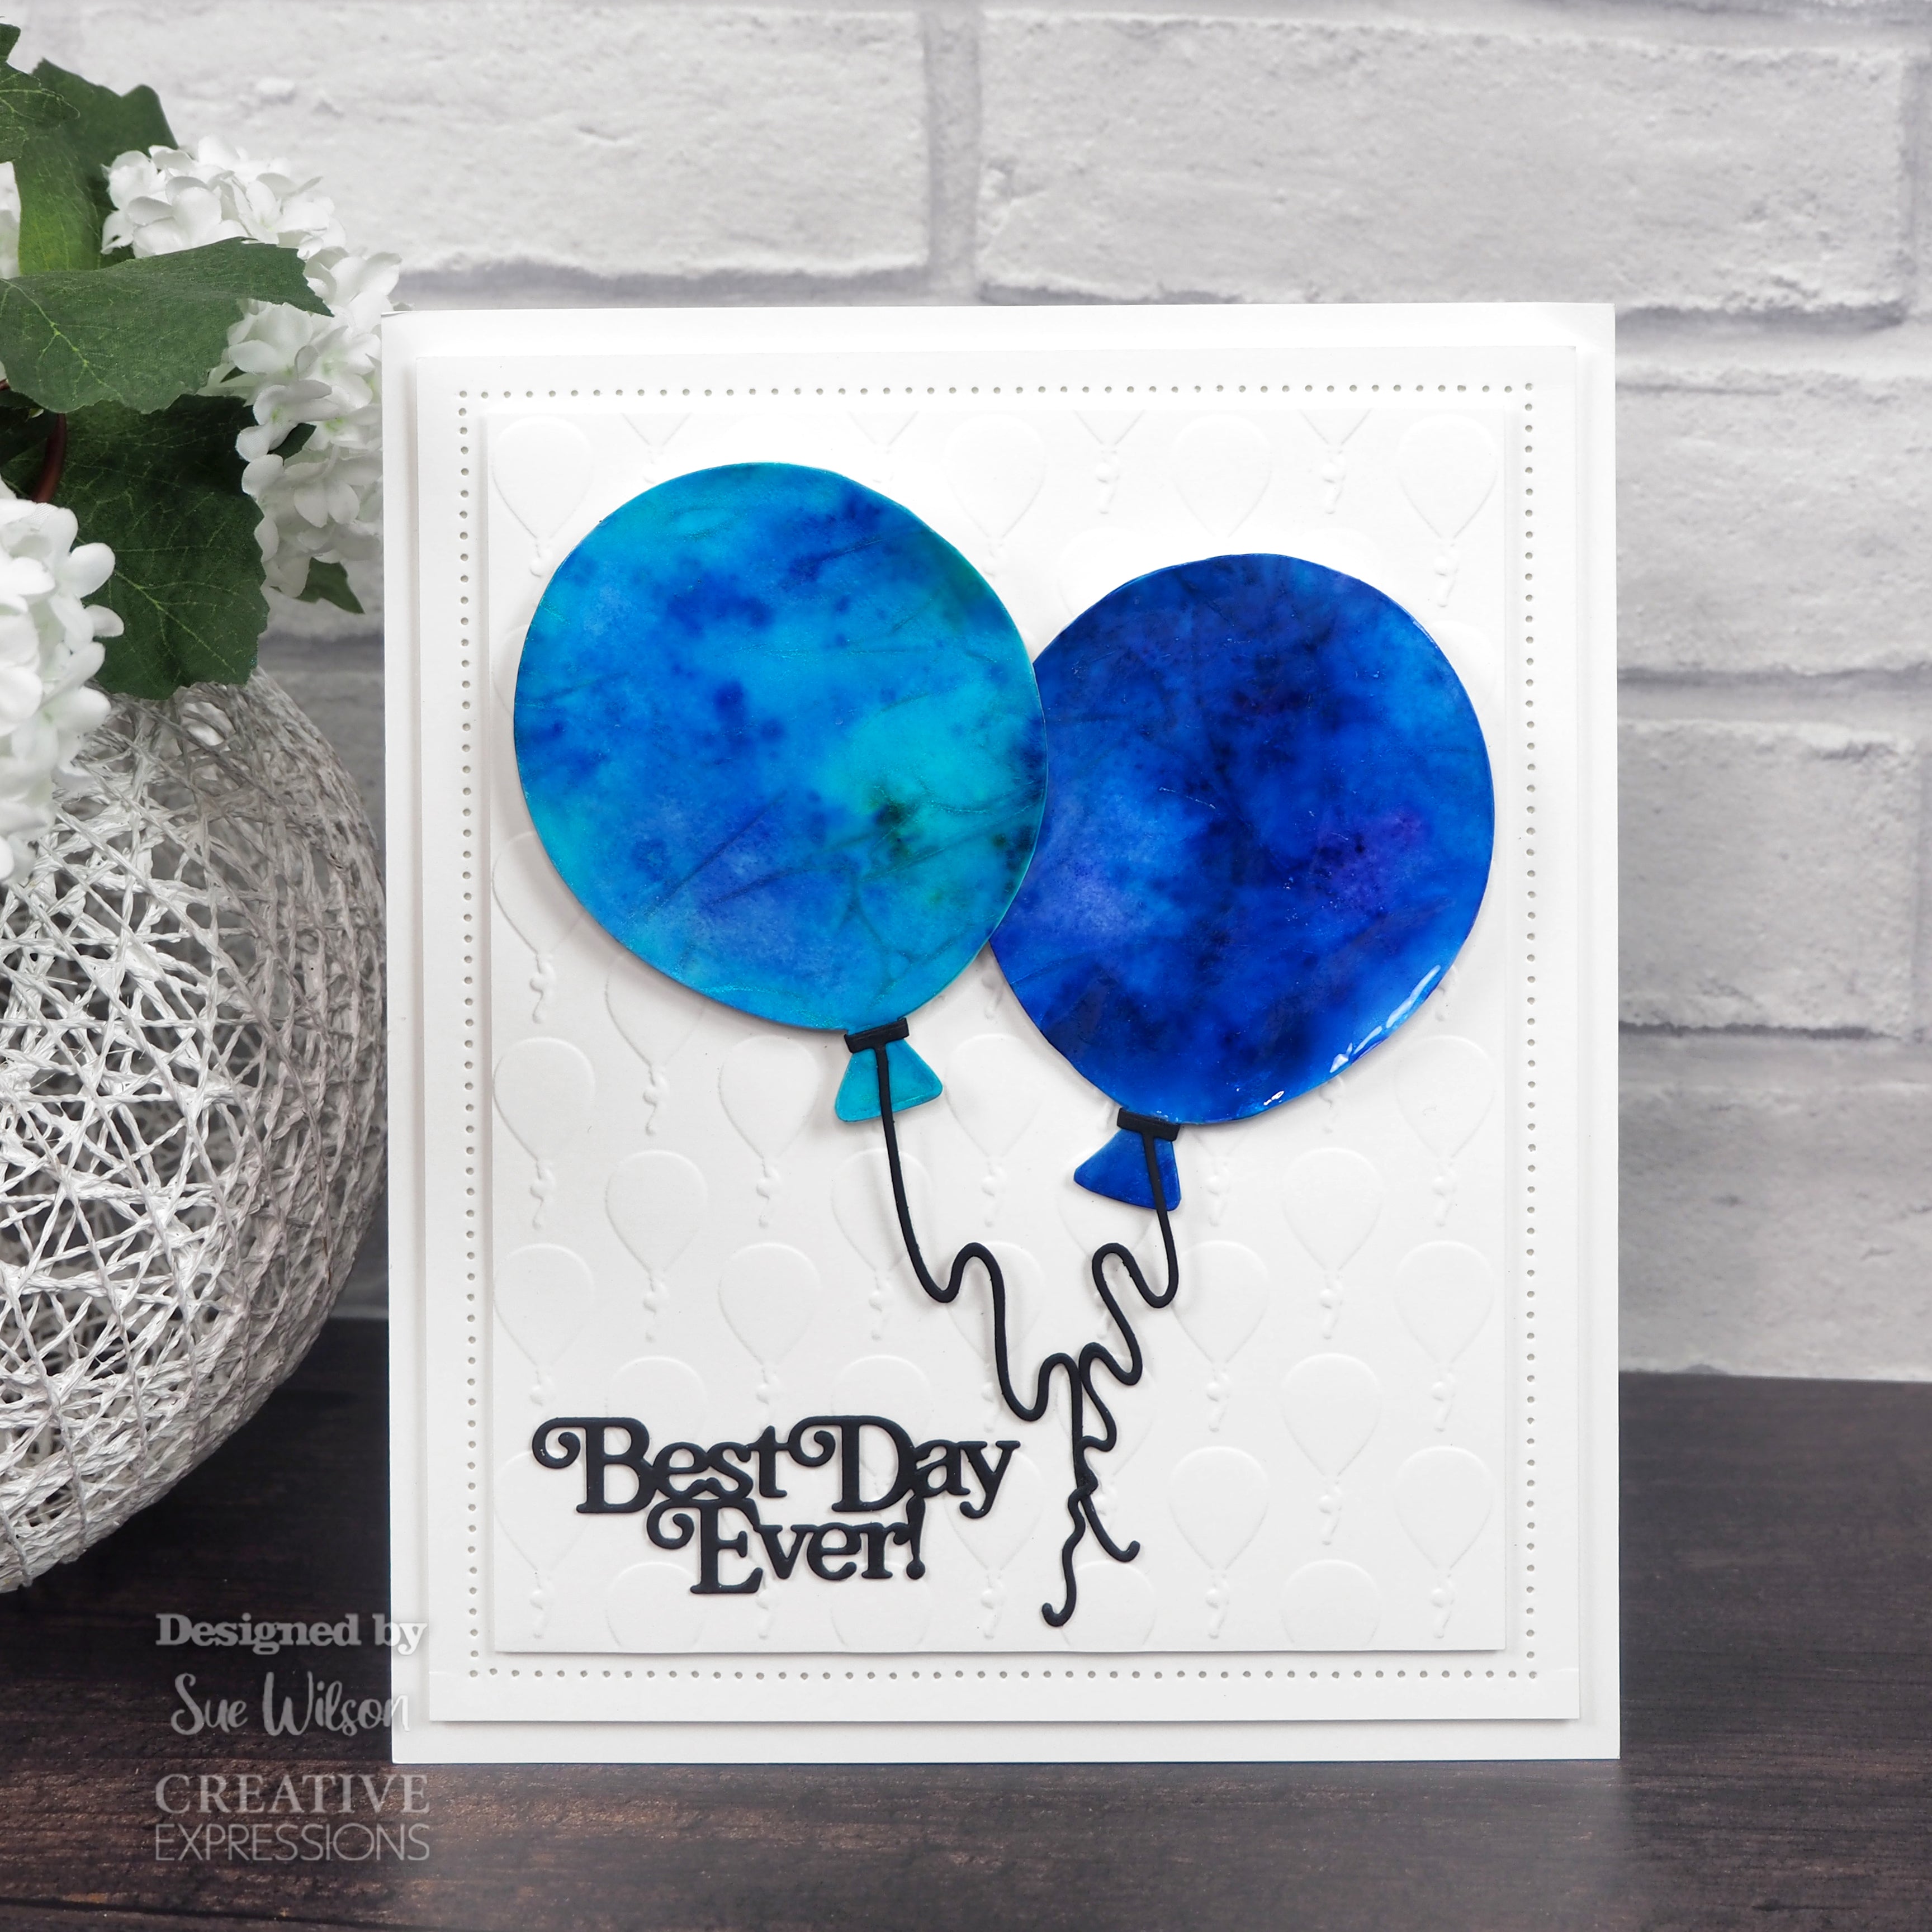 Creative Expressions Sue Wilson Mini Expressions Best Day Ever Craft Die